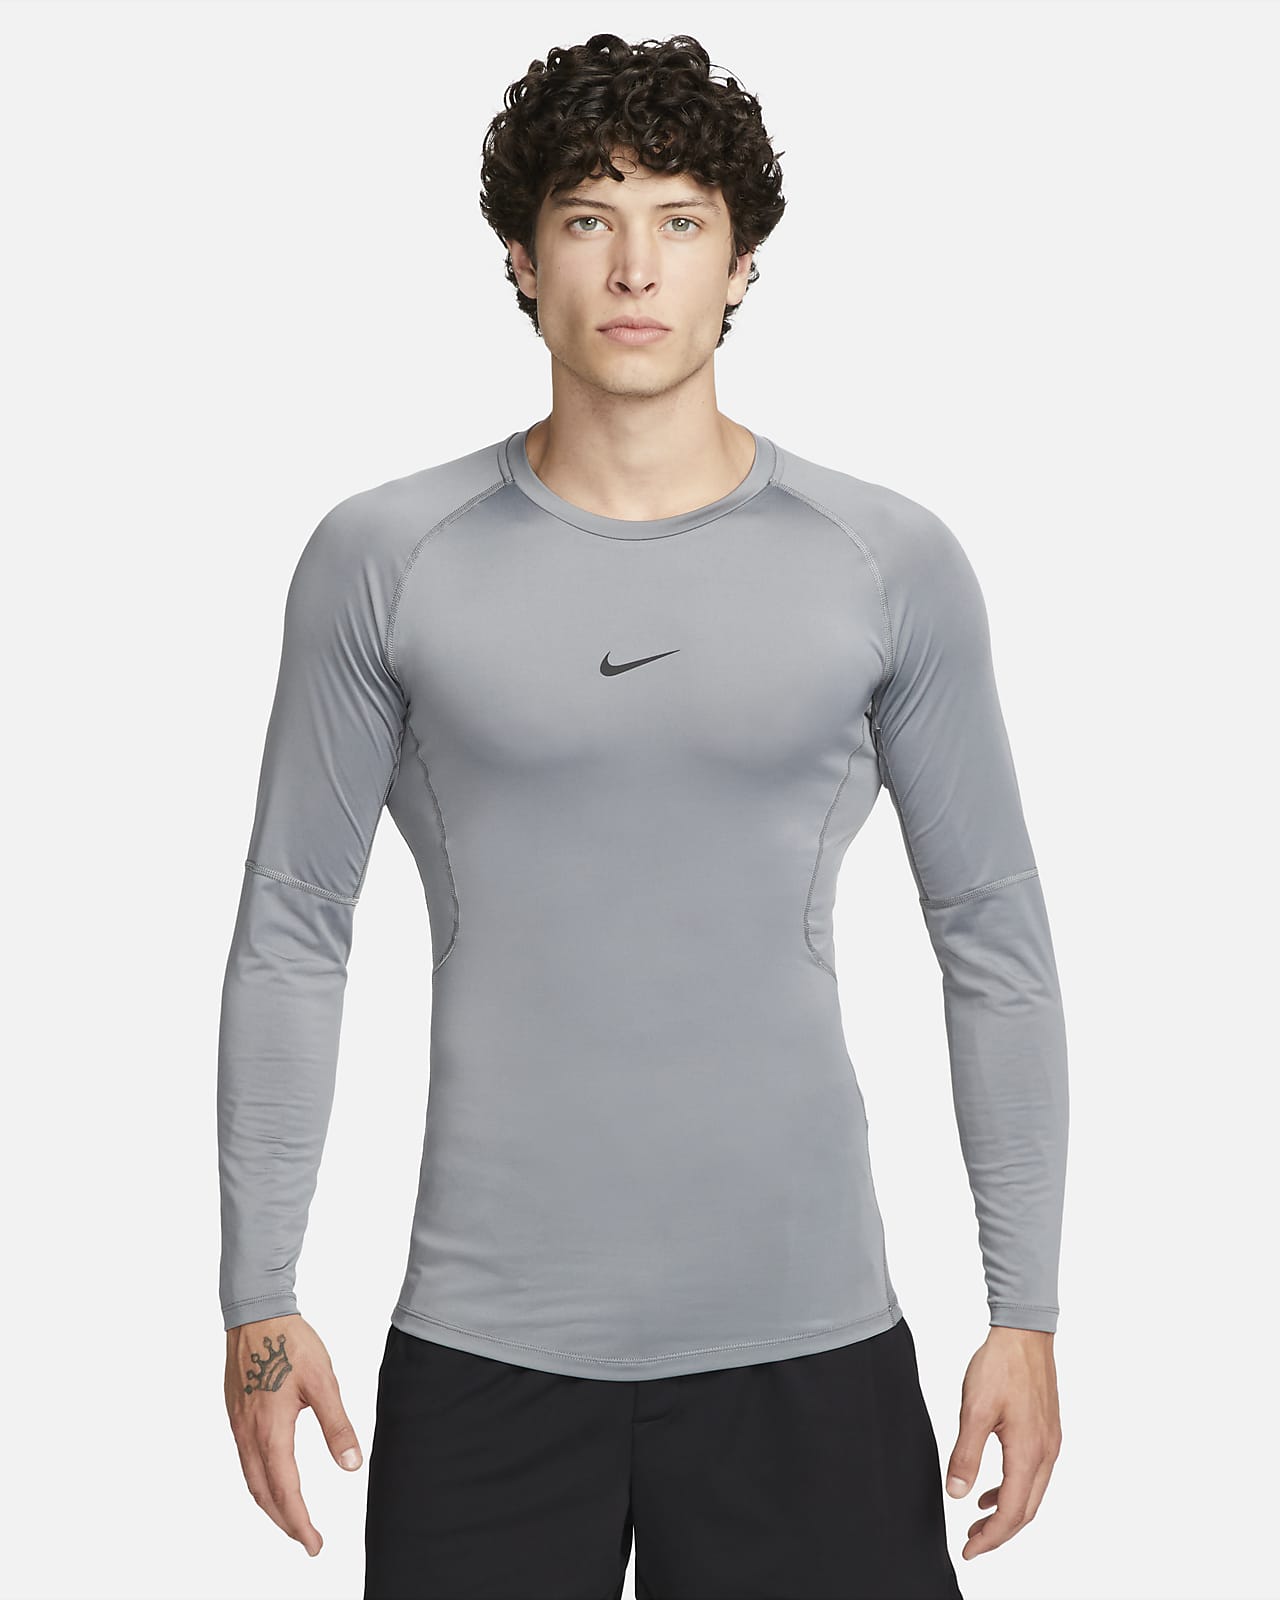 https://static.nike.com/a/images/t_PDP_1280_v1/f_auto,q_auto:eco/24e1c0de-5abd-4d8f-86ec-9c1818f3a623/pro-dri-fit-tight-long-sleeve-fitness-top-sLFgtc.png